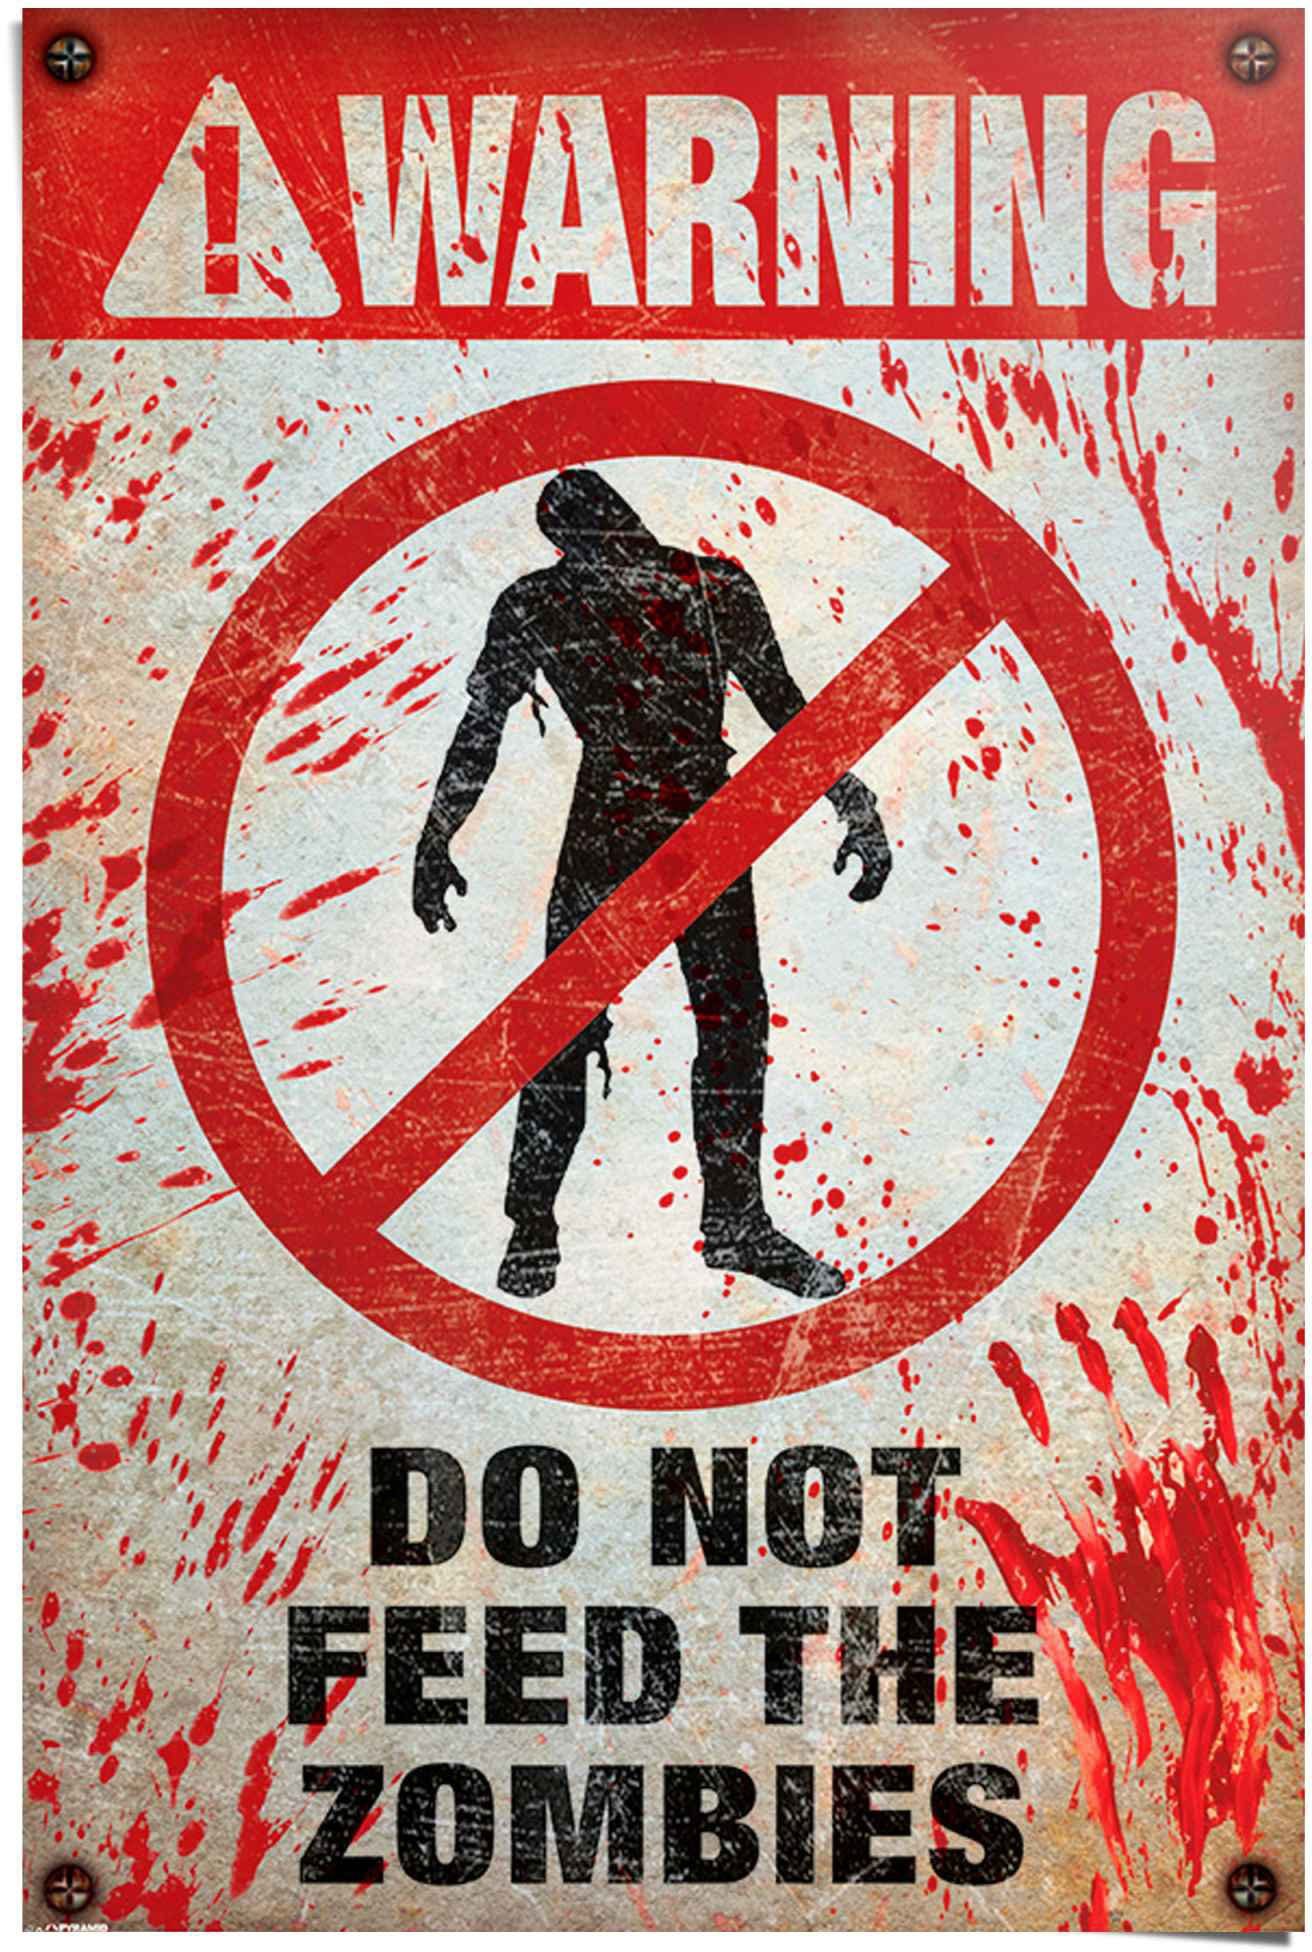 (1 Not Warning! Do Zombies, The Poster Feed Reinders! St)